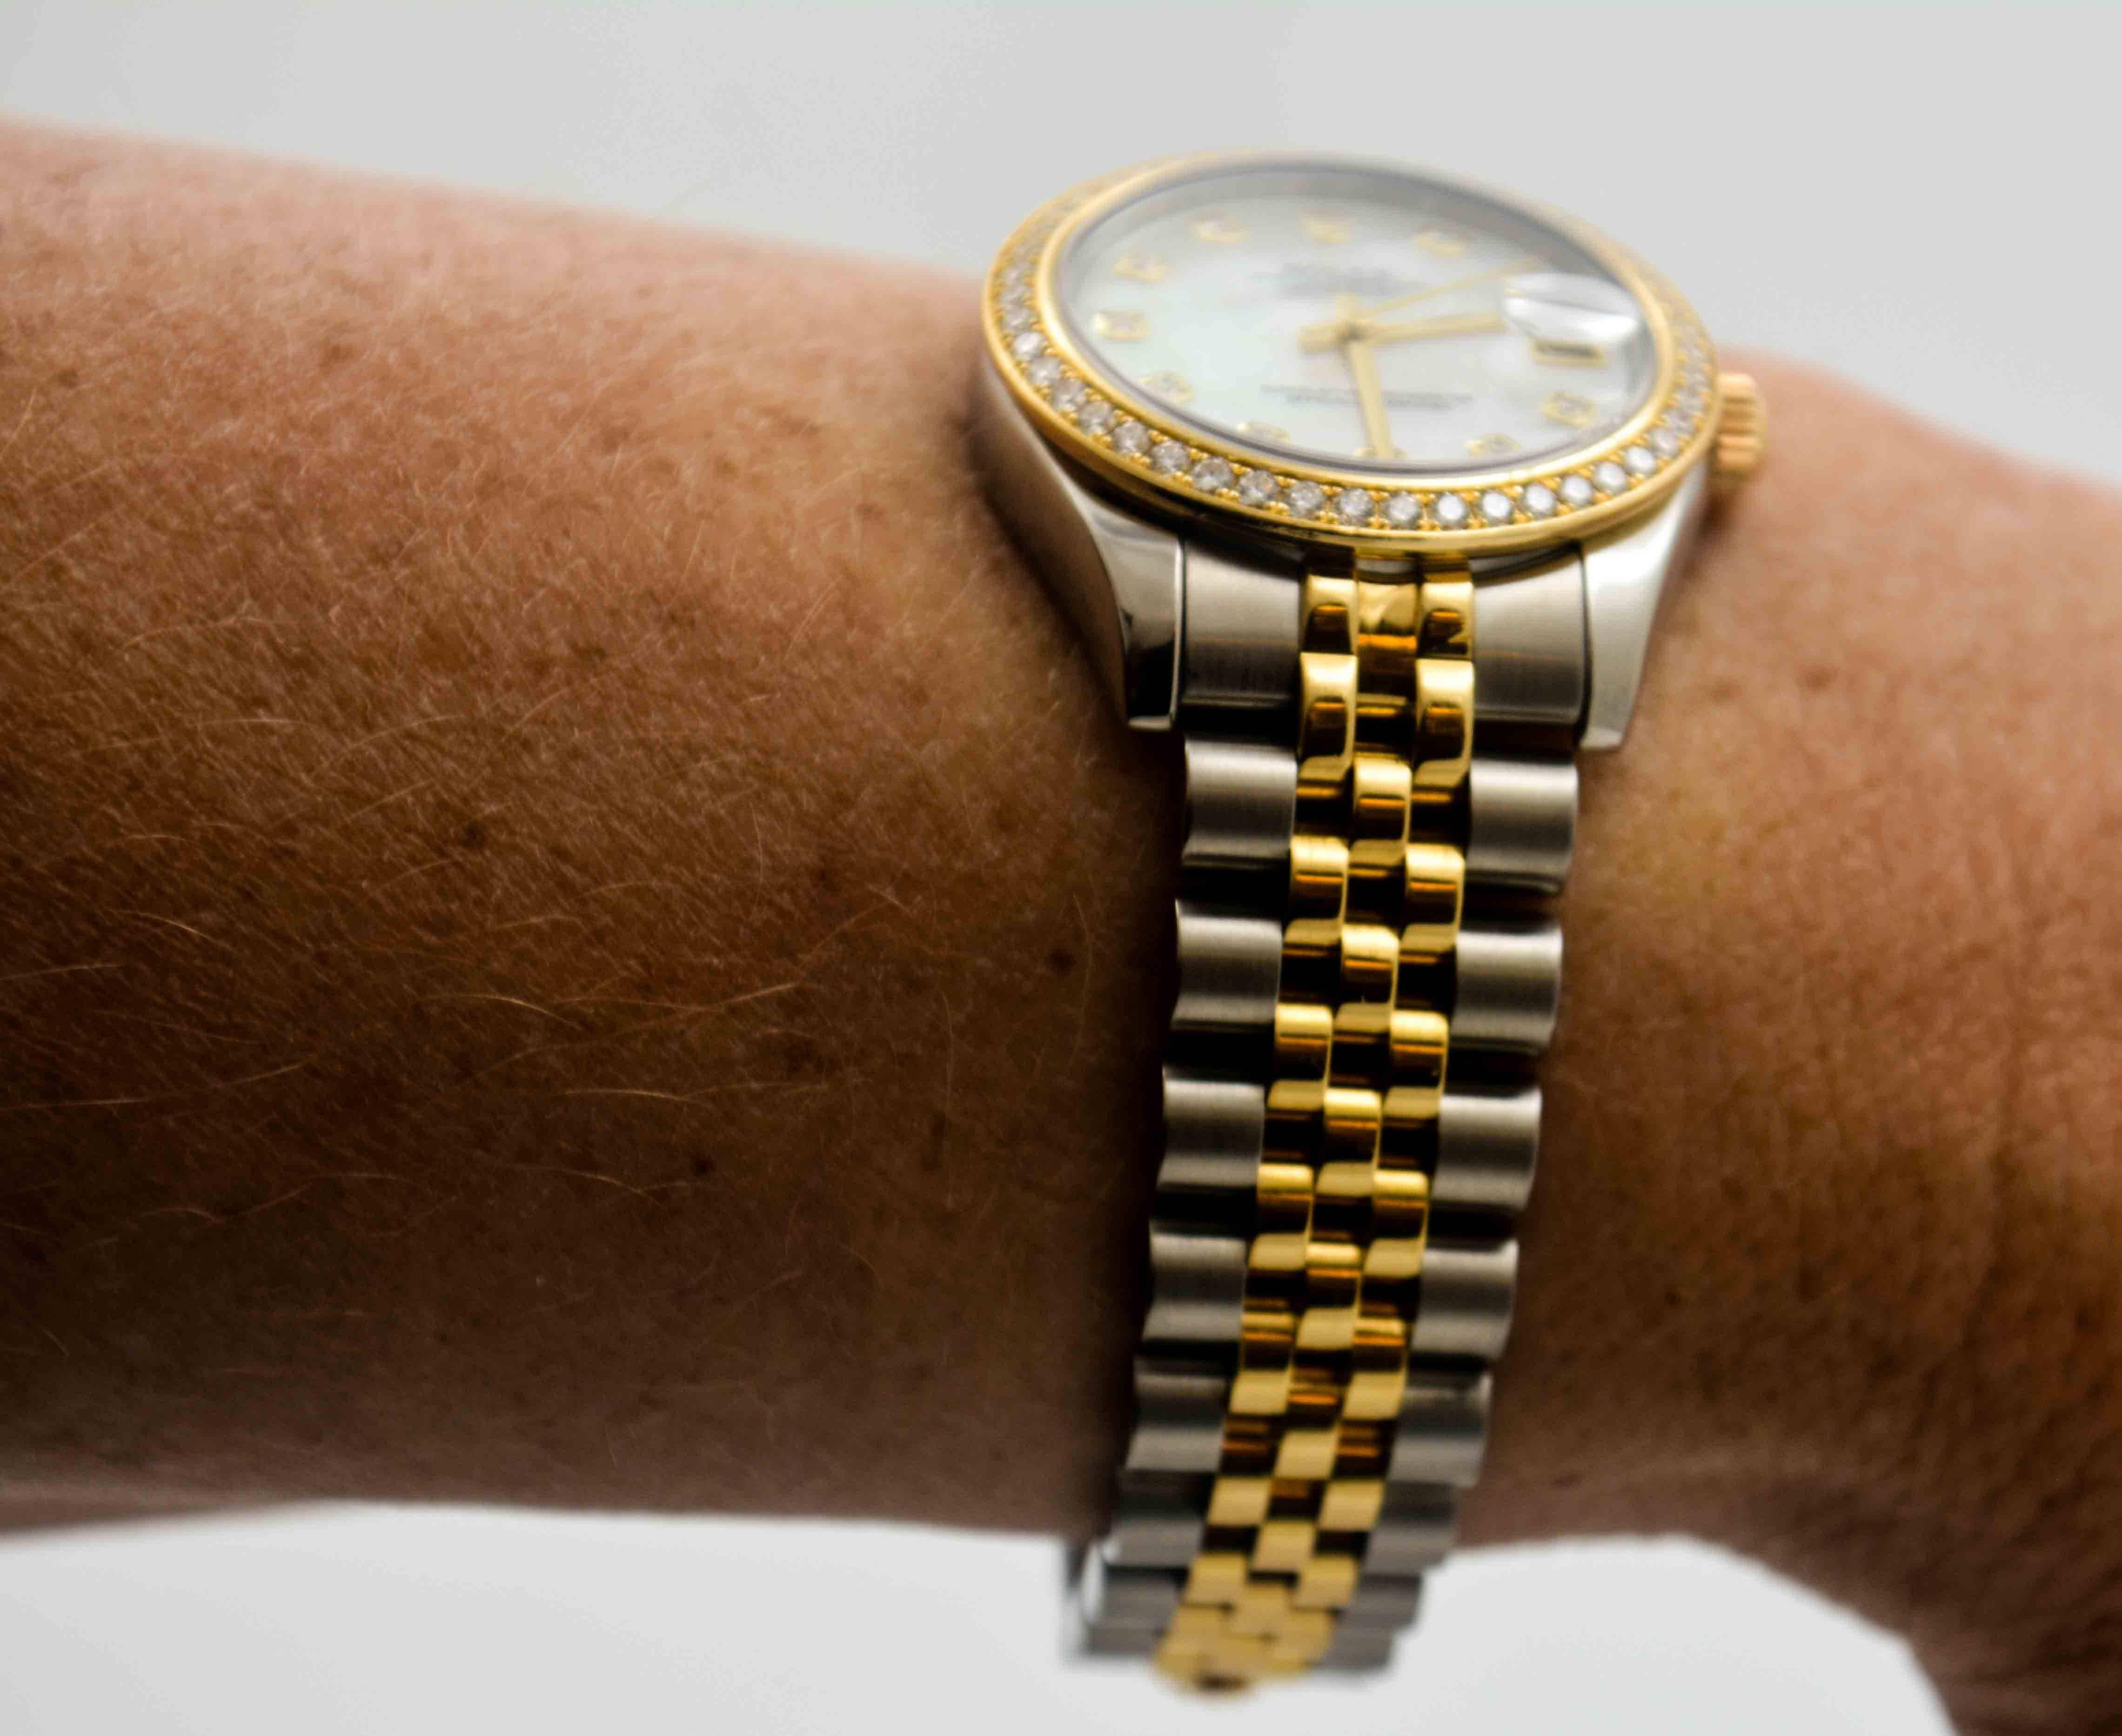  One of the most recognized and recognizable of watches, this ladies Rolex Datejust Watch is crafted in 18kt yellow gold and stainless steel for high luster and shine, as well as strength and durability. The 18 kt Rolex Diamond bezel adds a